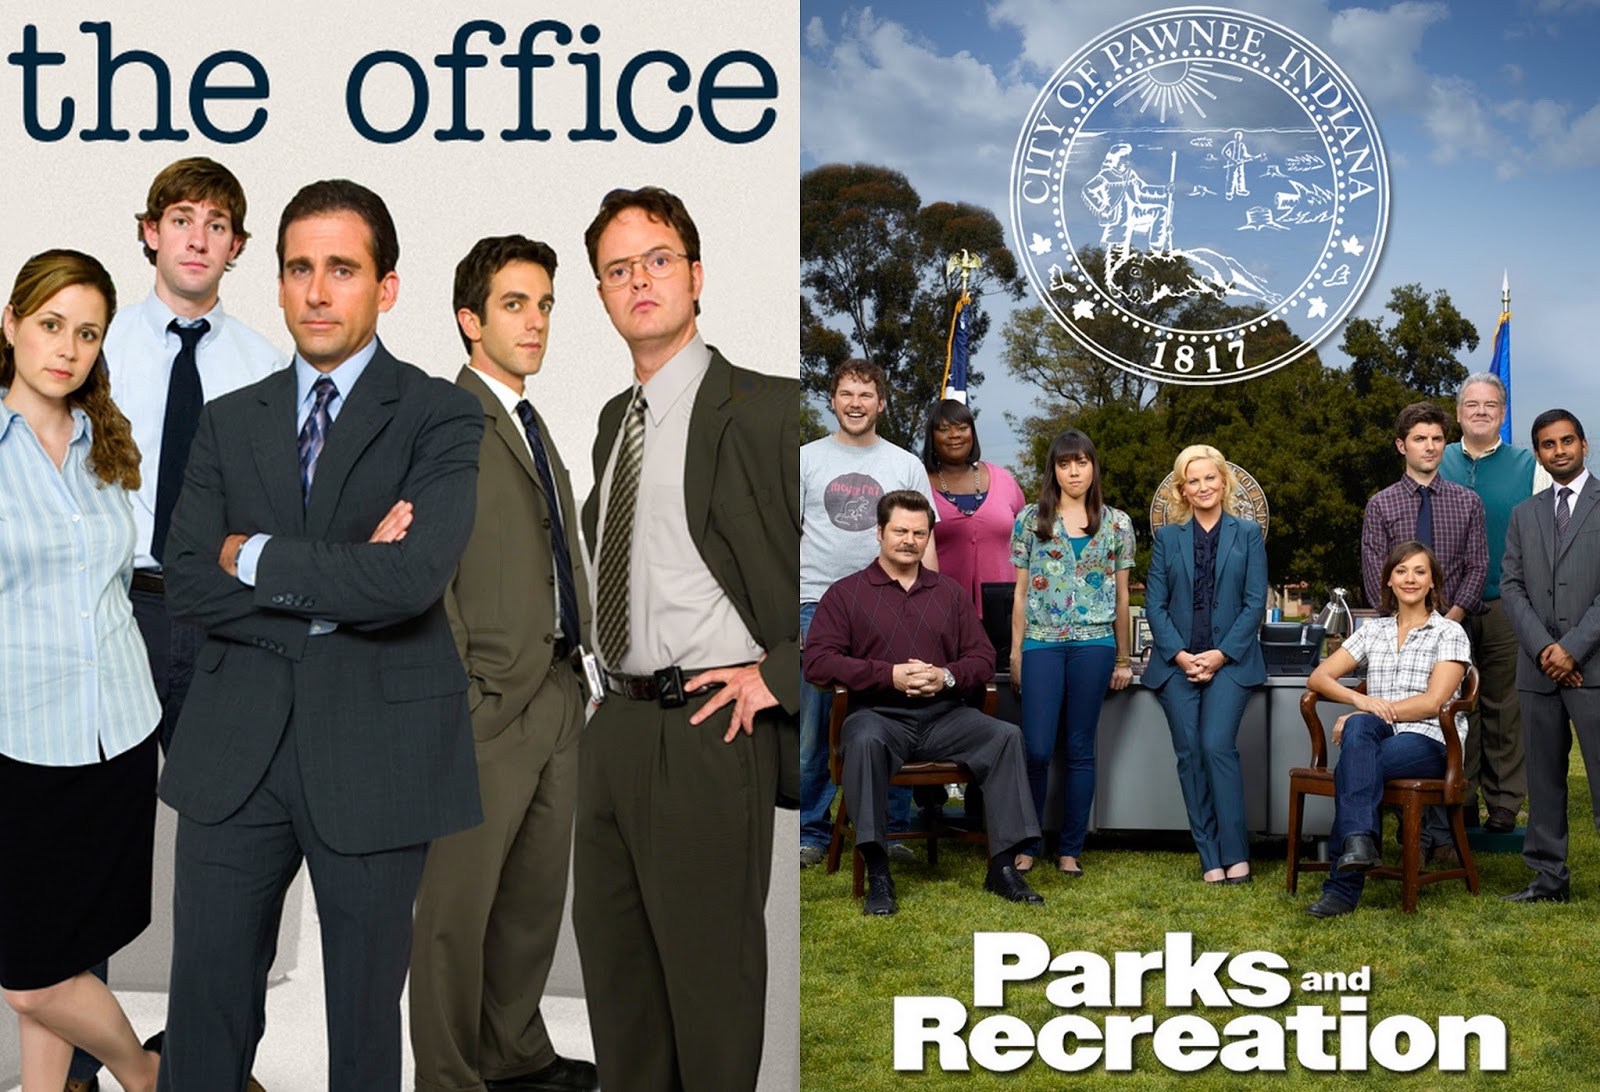 The Great Debate: “The Office” vs. “Parks and Recreation” – Dork Daily